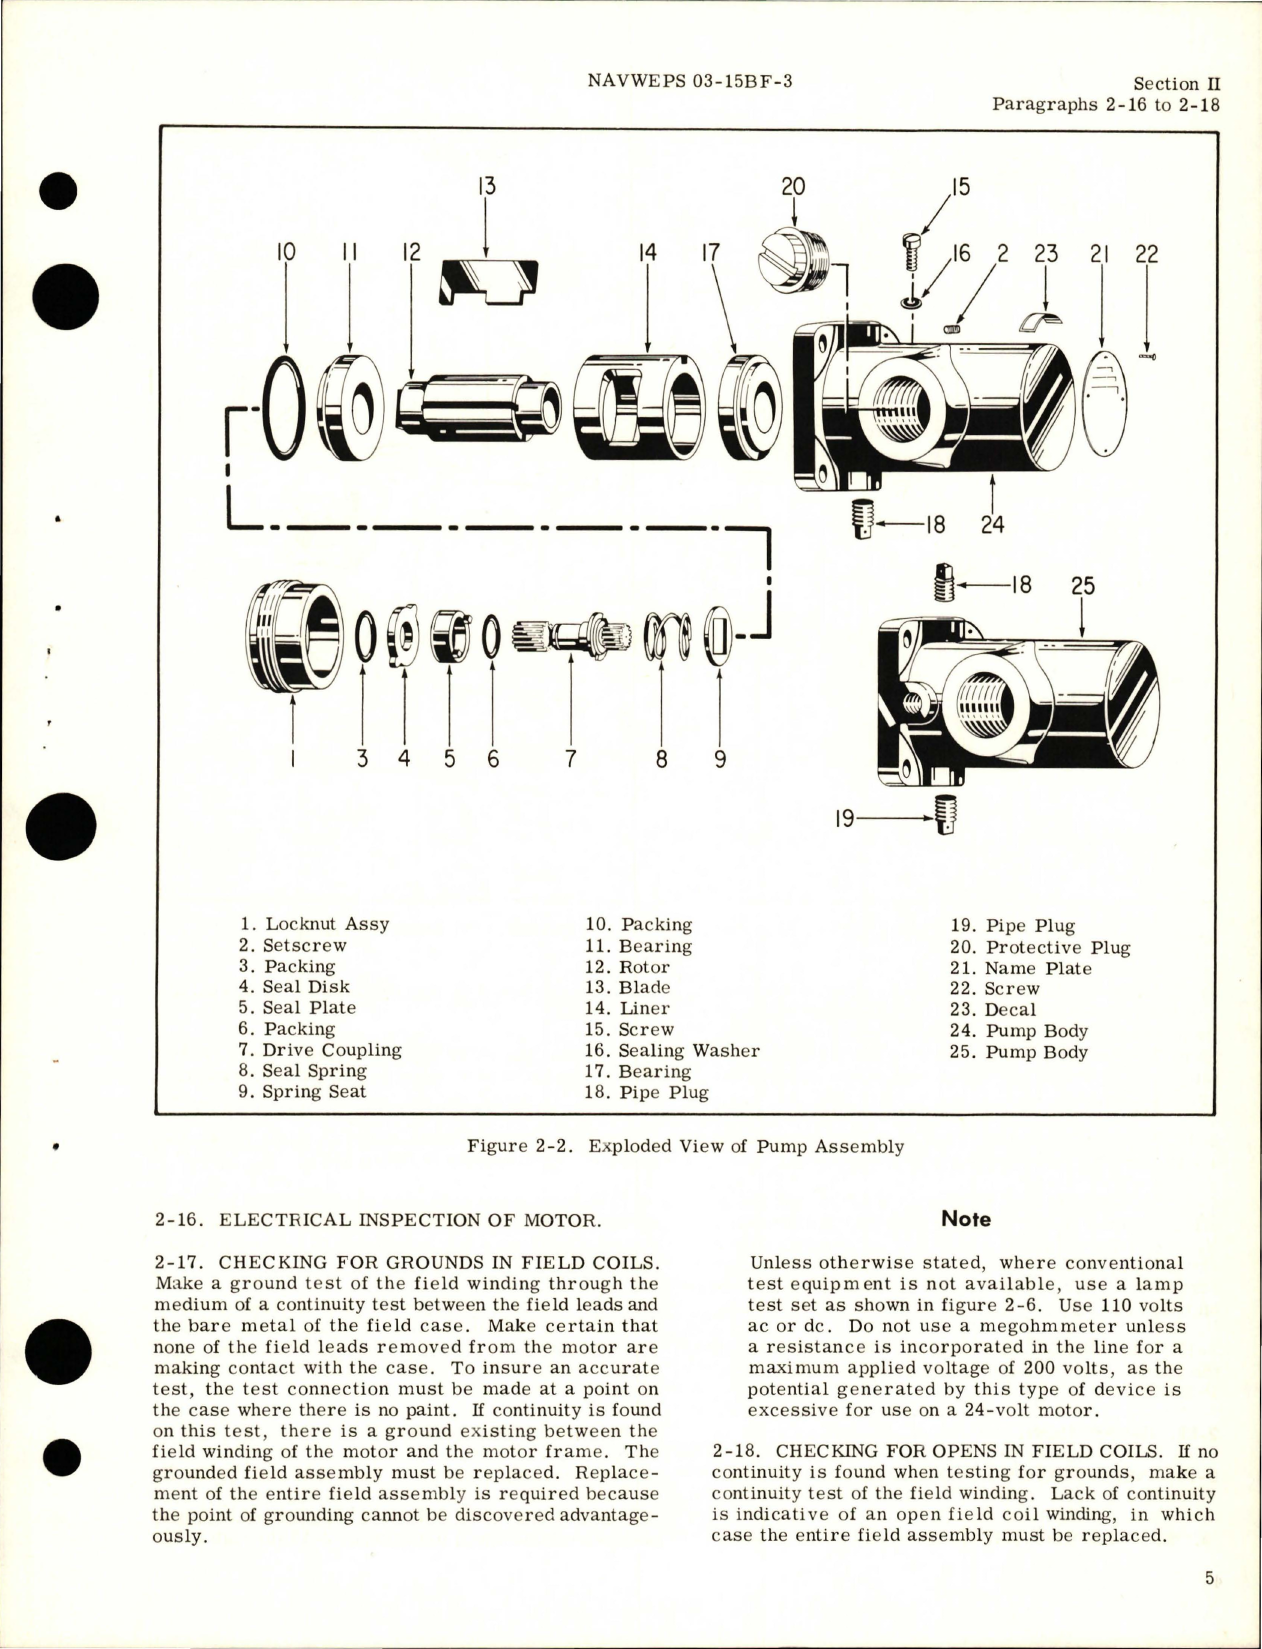 Sample page 9 from AirCorps Library document: Overhaul Instructions for Electric Motor-Driven Hydraulic Oil Pump Assembly - Parts RG6100E1 and RG6100H